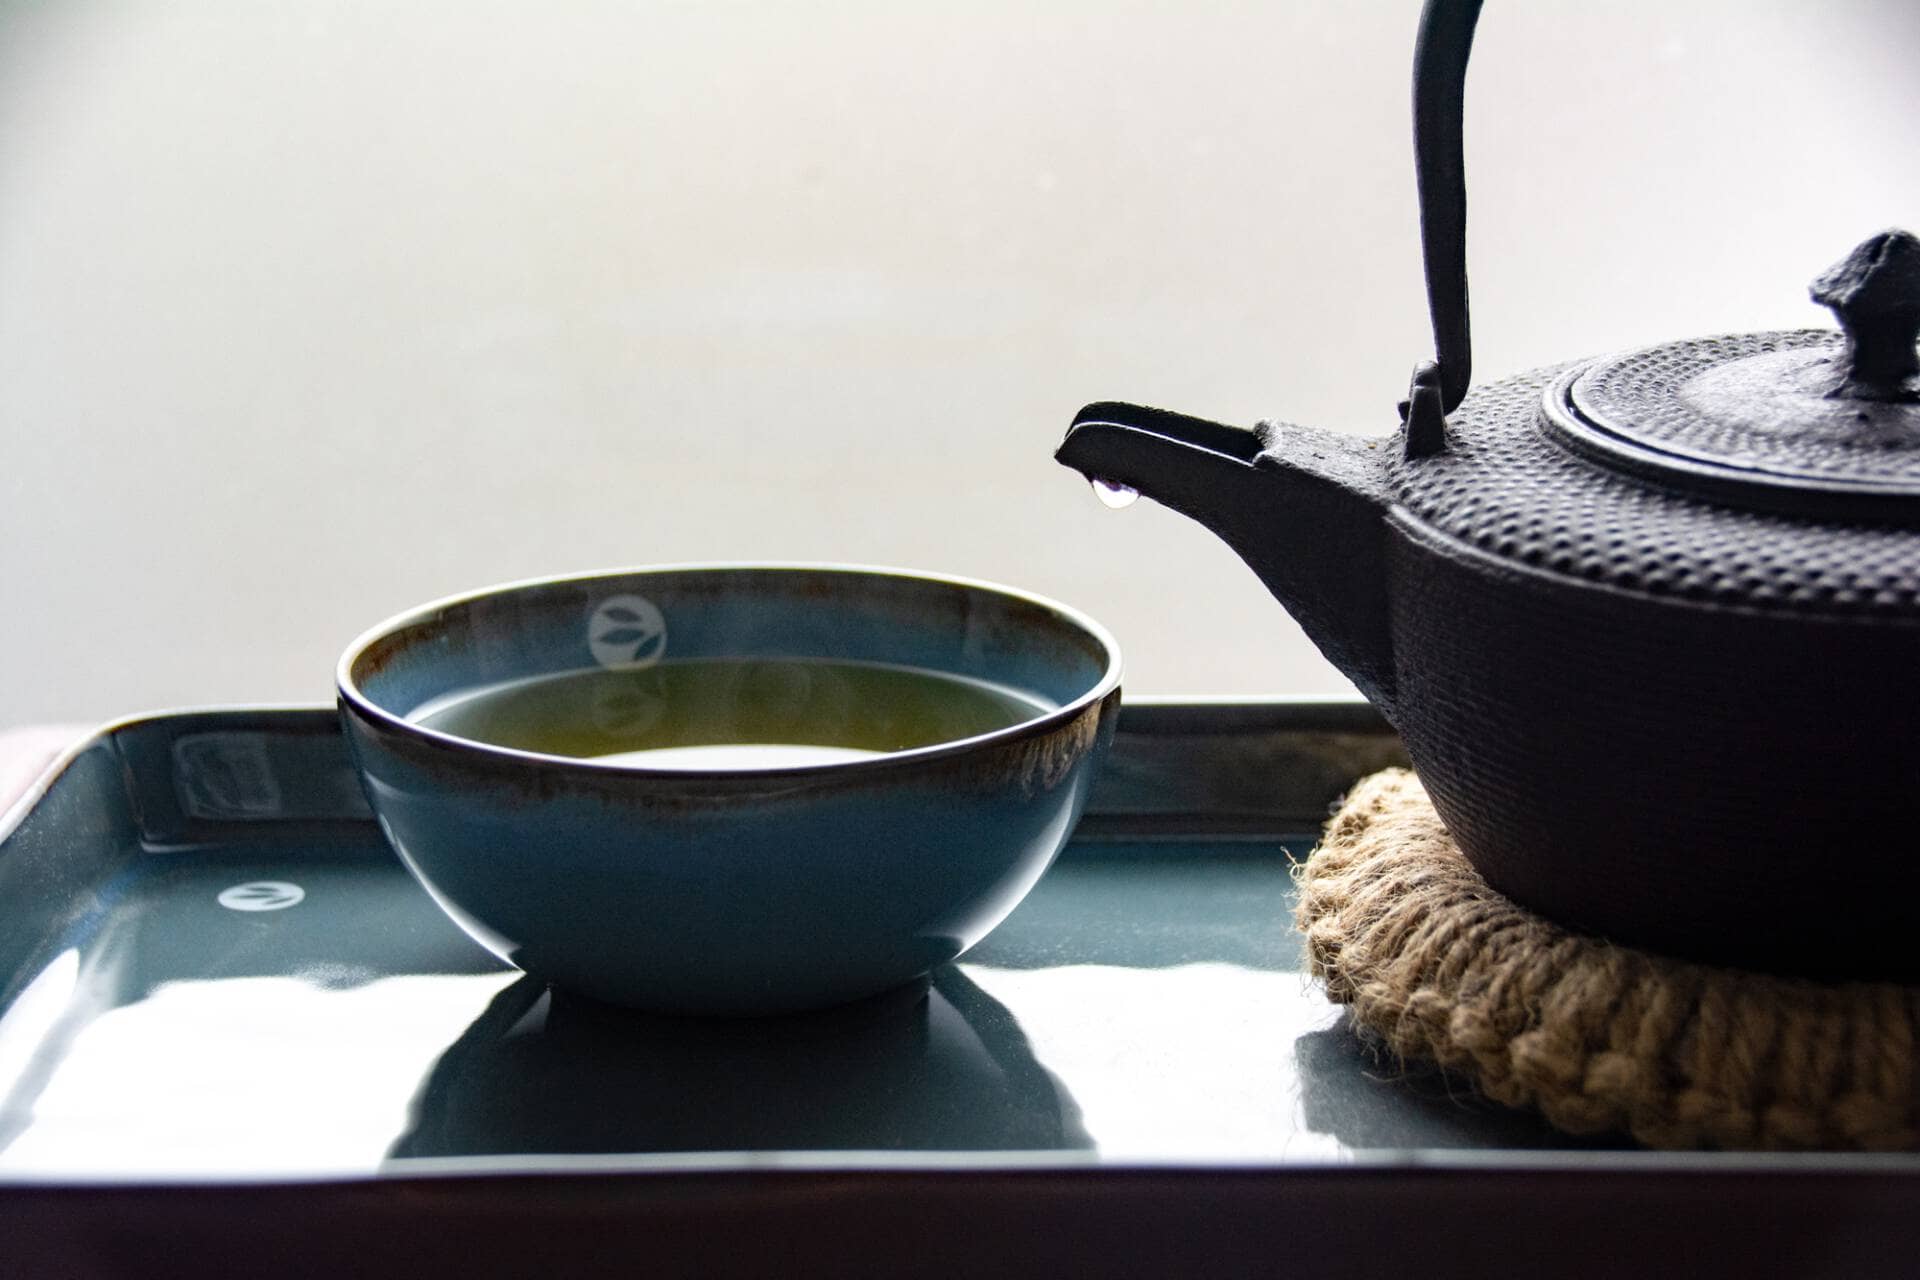 Tea_Passion_Sven-Christian Lange_Branding Photography_Ancient Black Cast Iron Kettle On Coaster Made Of Bast With Drop On Spout And Steaming Turquoise Tea Bowl On Platter